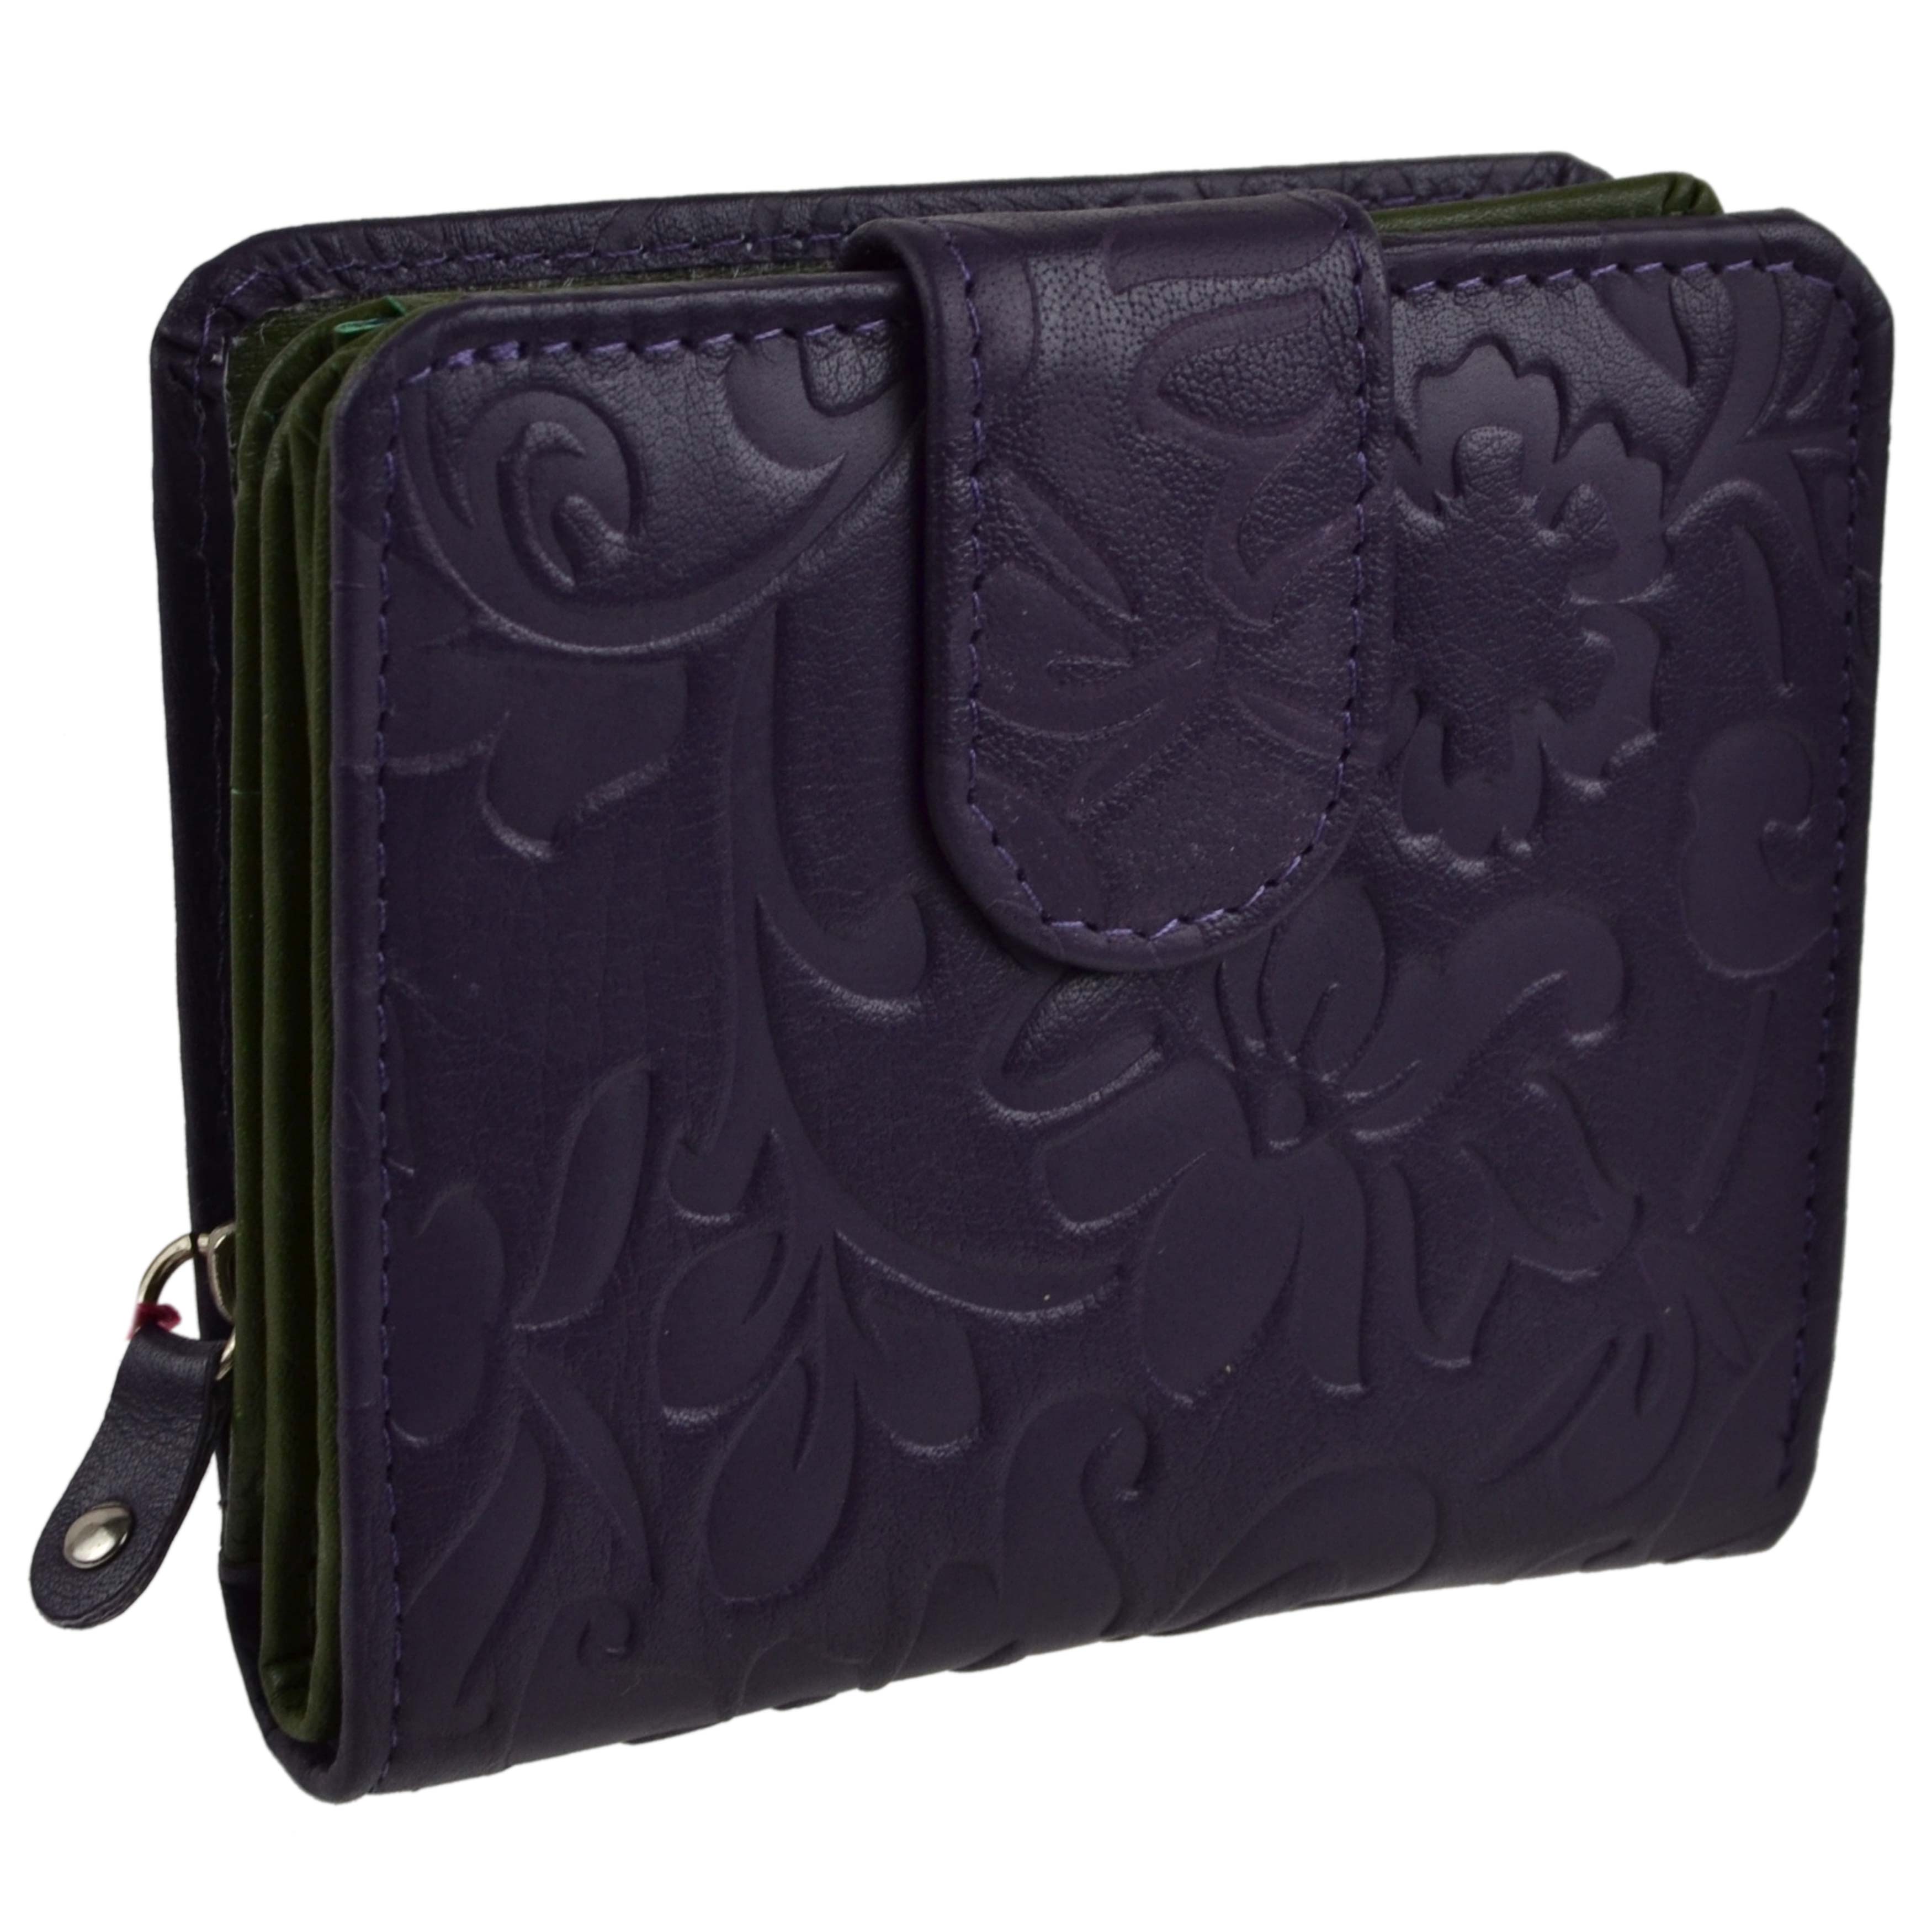 Ladies Embossed Small Leather Purse/Wallet by Mala; Rimini Collection Floral (Pu | eBay